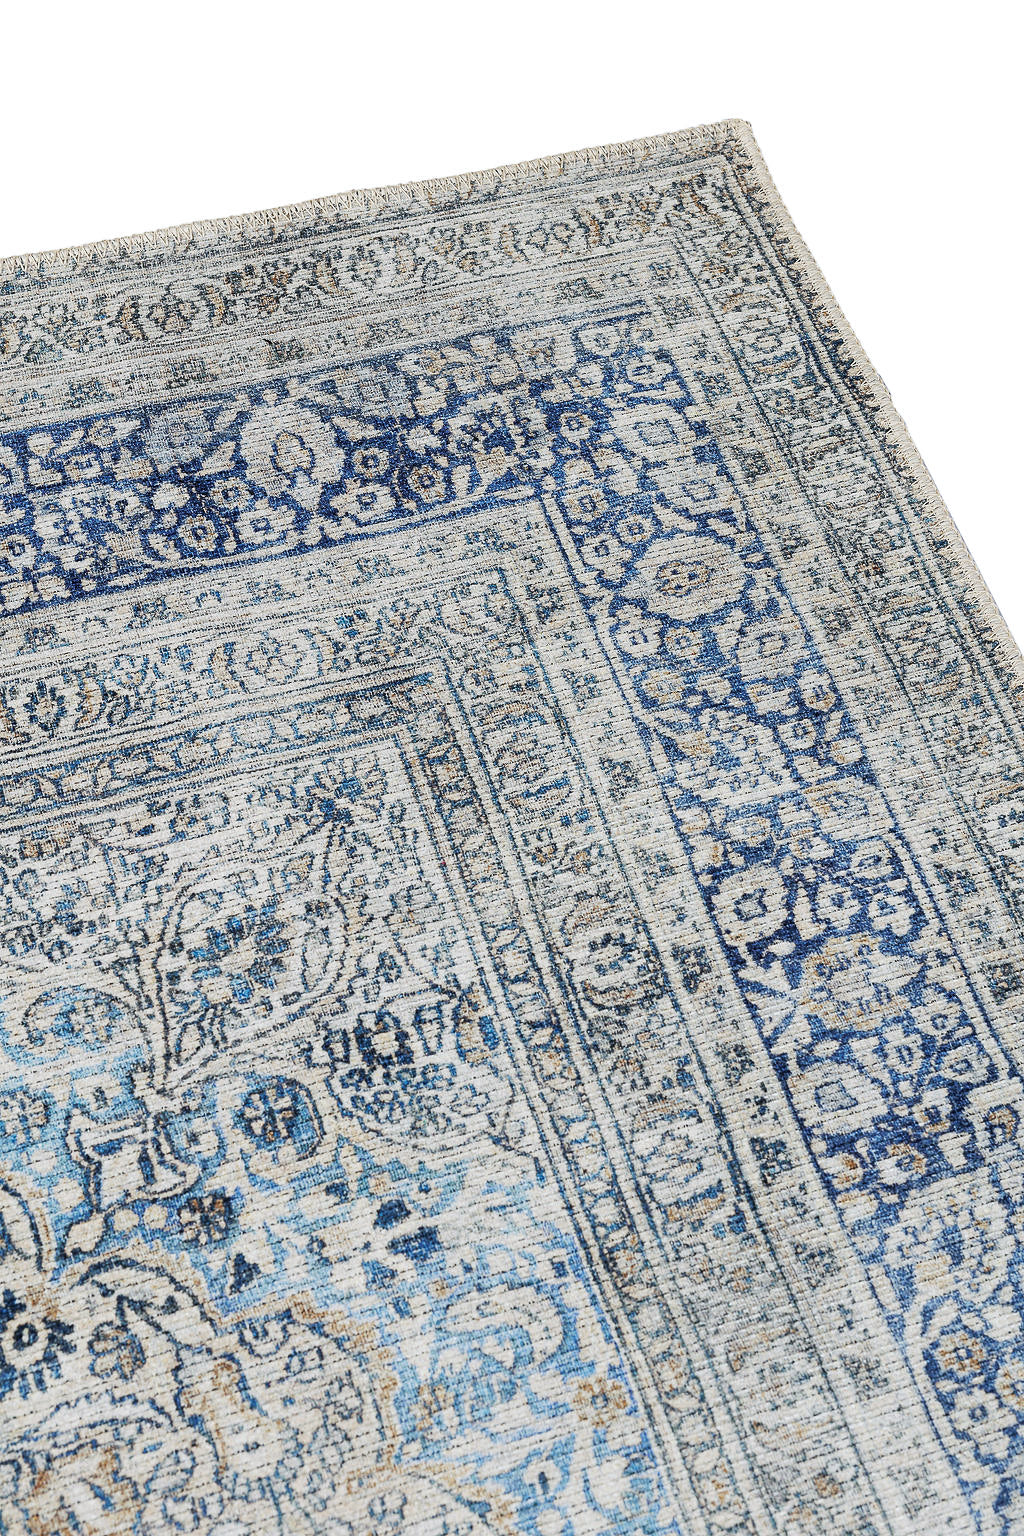 Blue and grey bordered vintage style rug